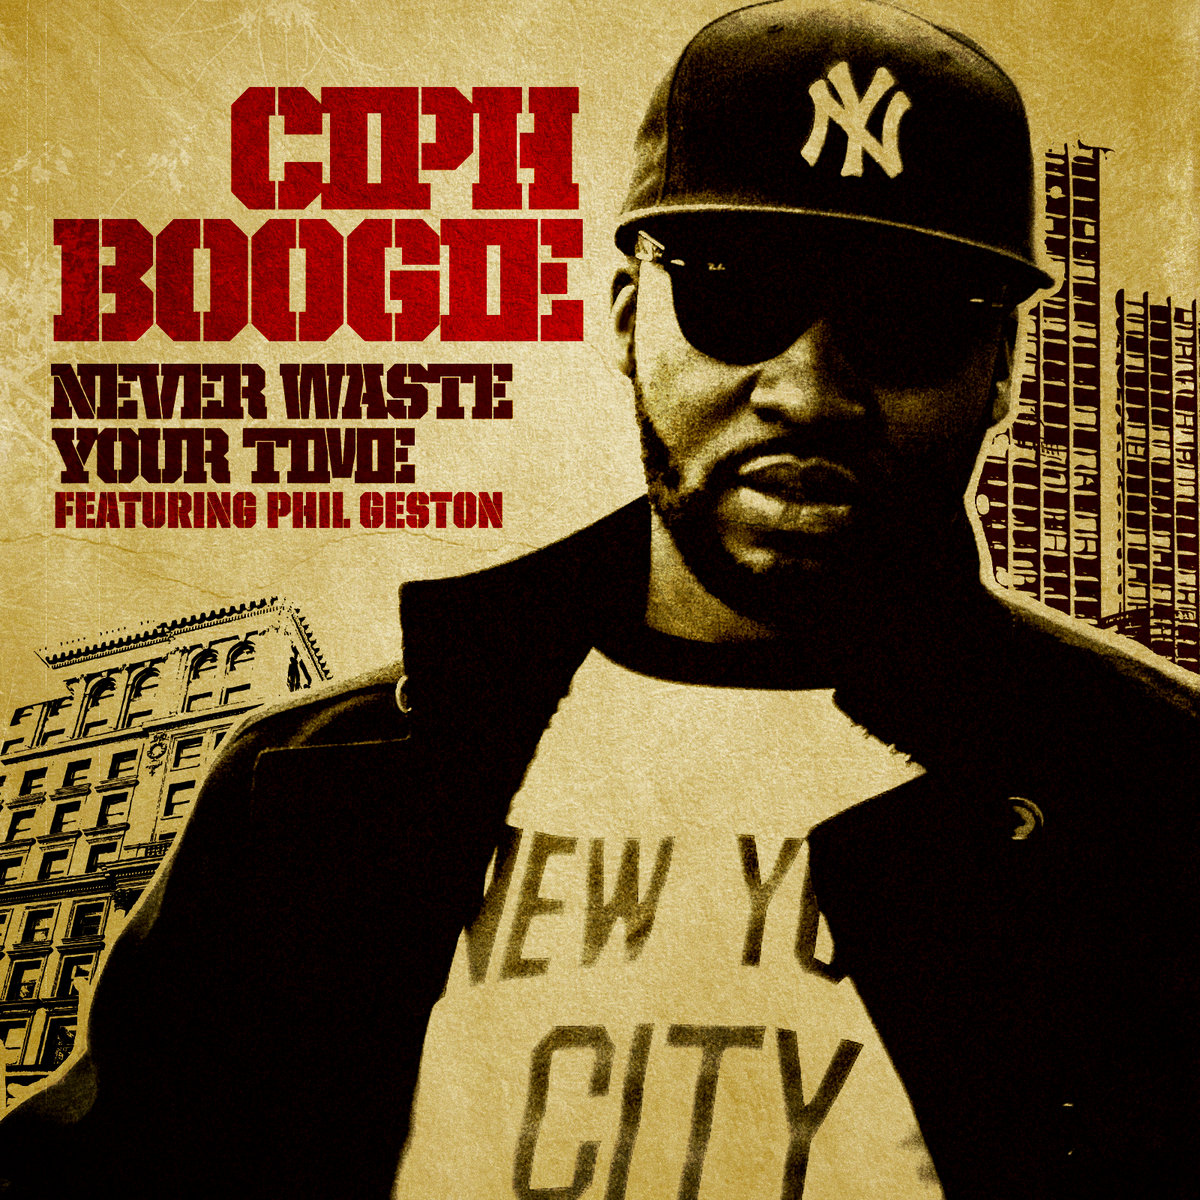 Never Waste Your Time Featuring Phil Geston | Ciph Boogie | Ciph